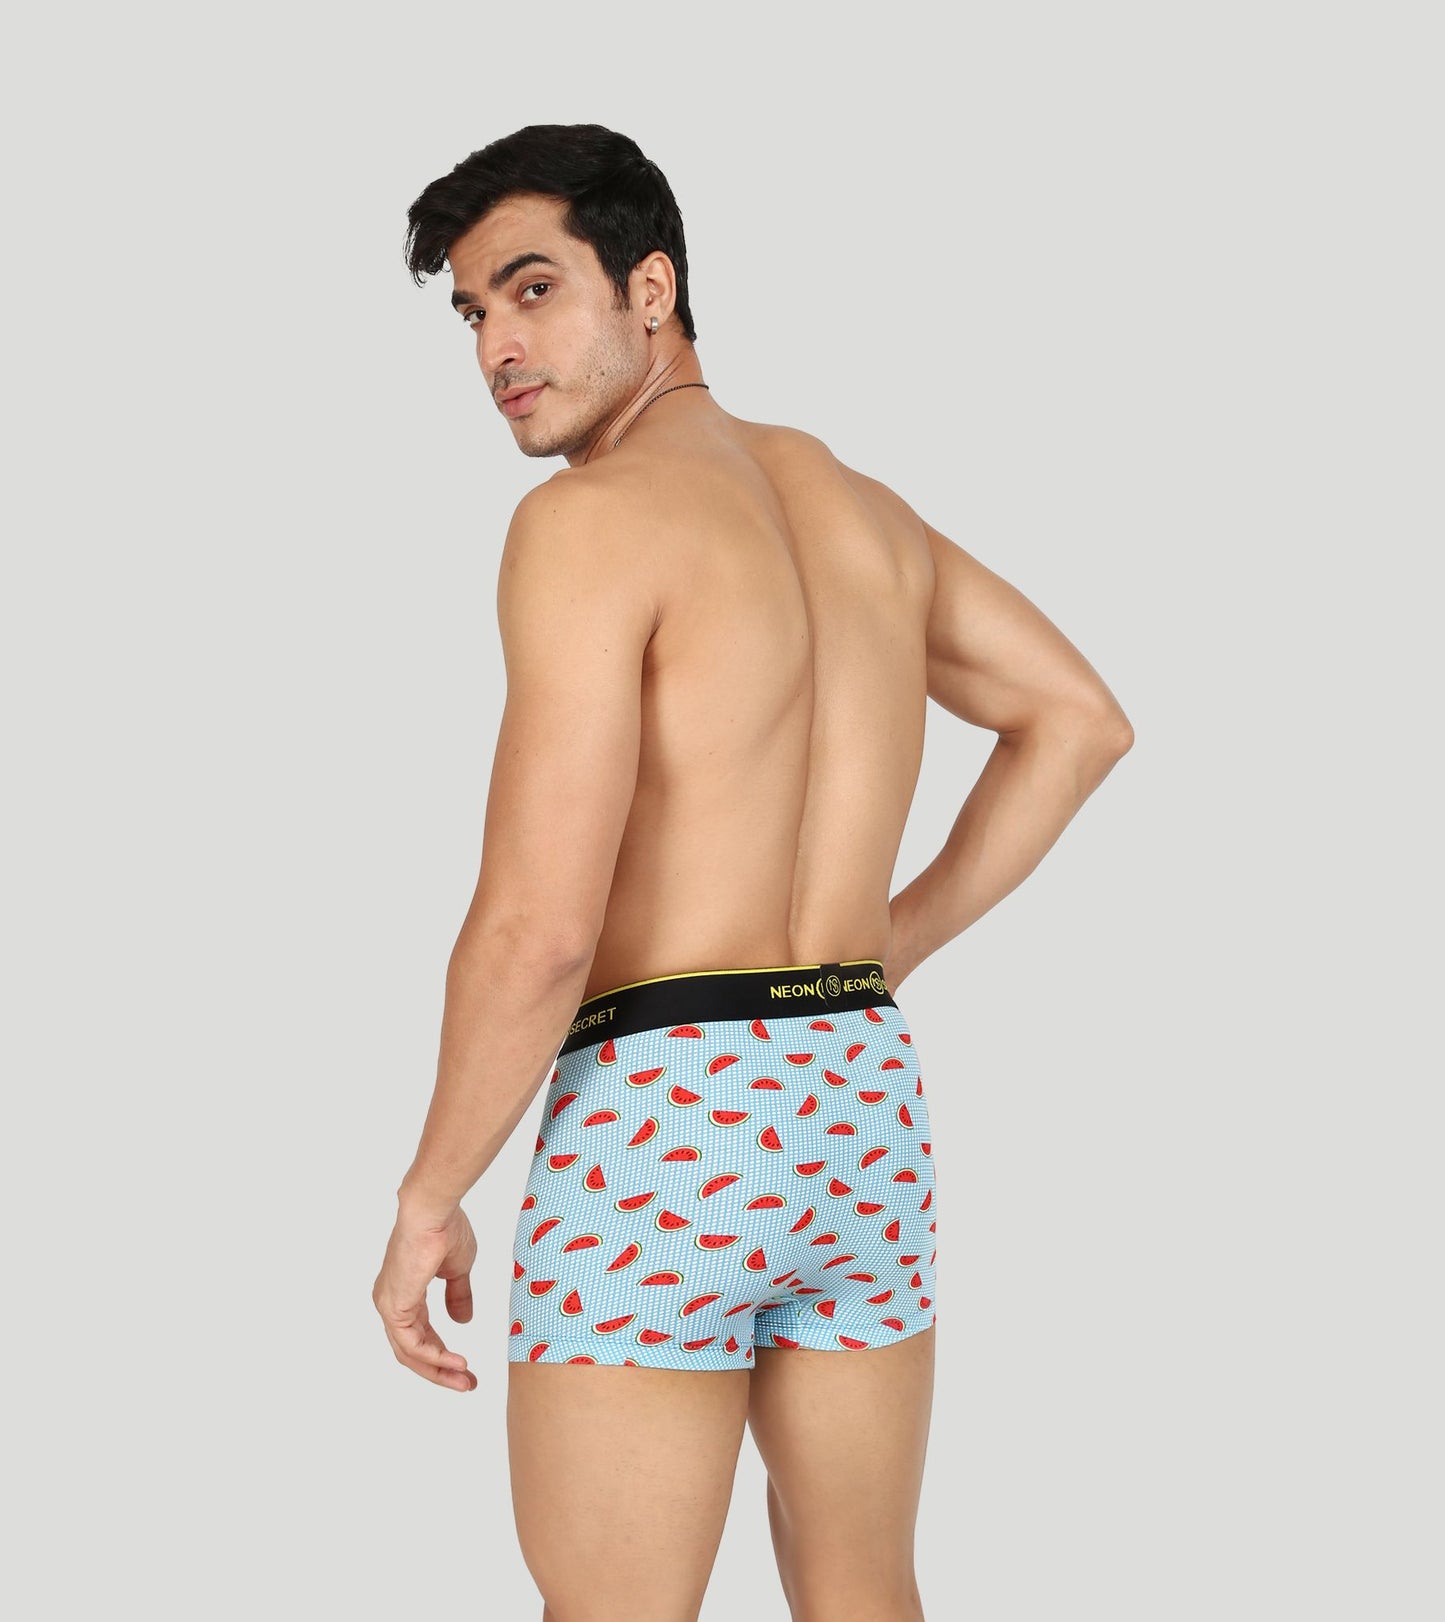 Comfy Combo : Spear Mint & Printed Melon Bom Design Pack of Two